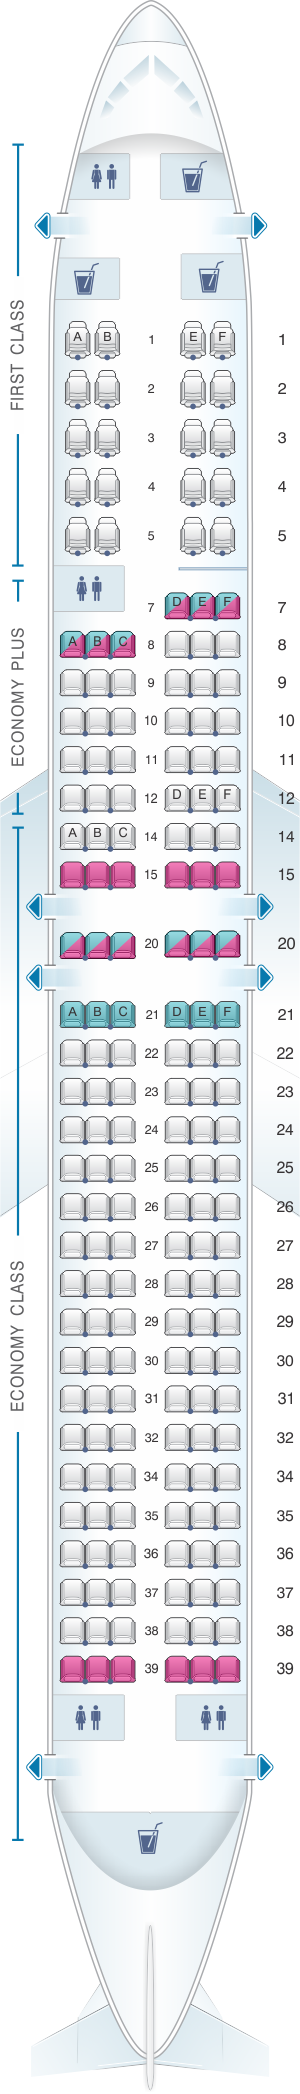 Seat map for United Airlines Boeing B737 900 - version 3